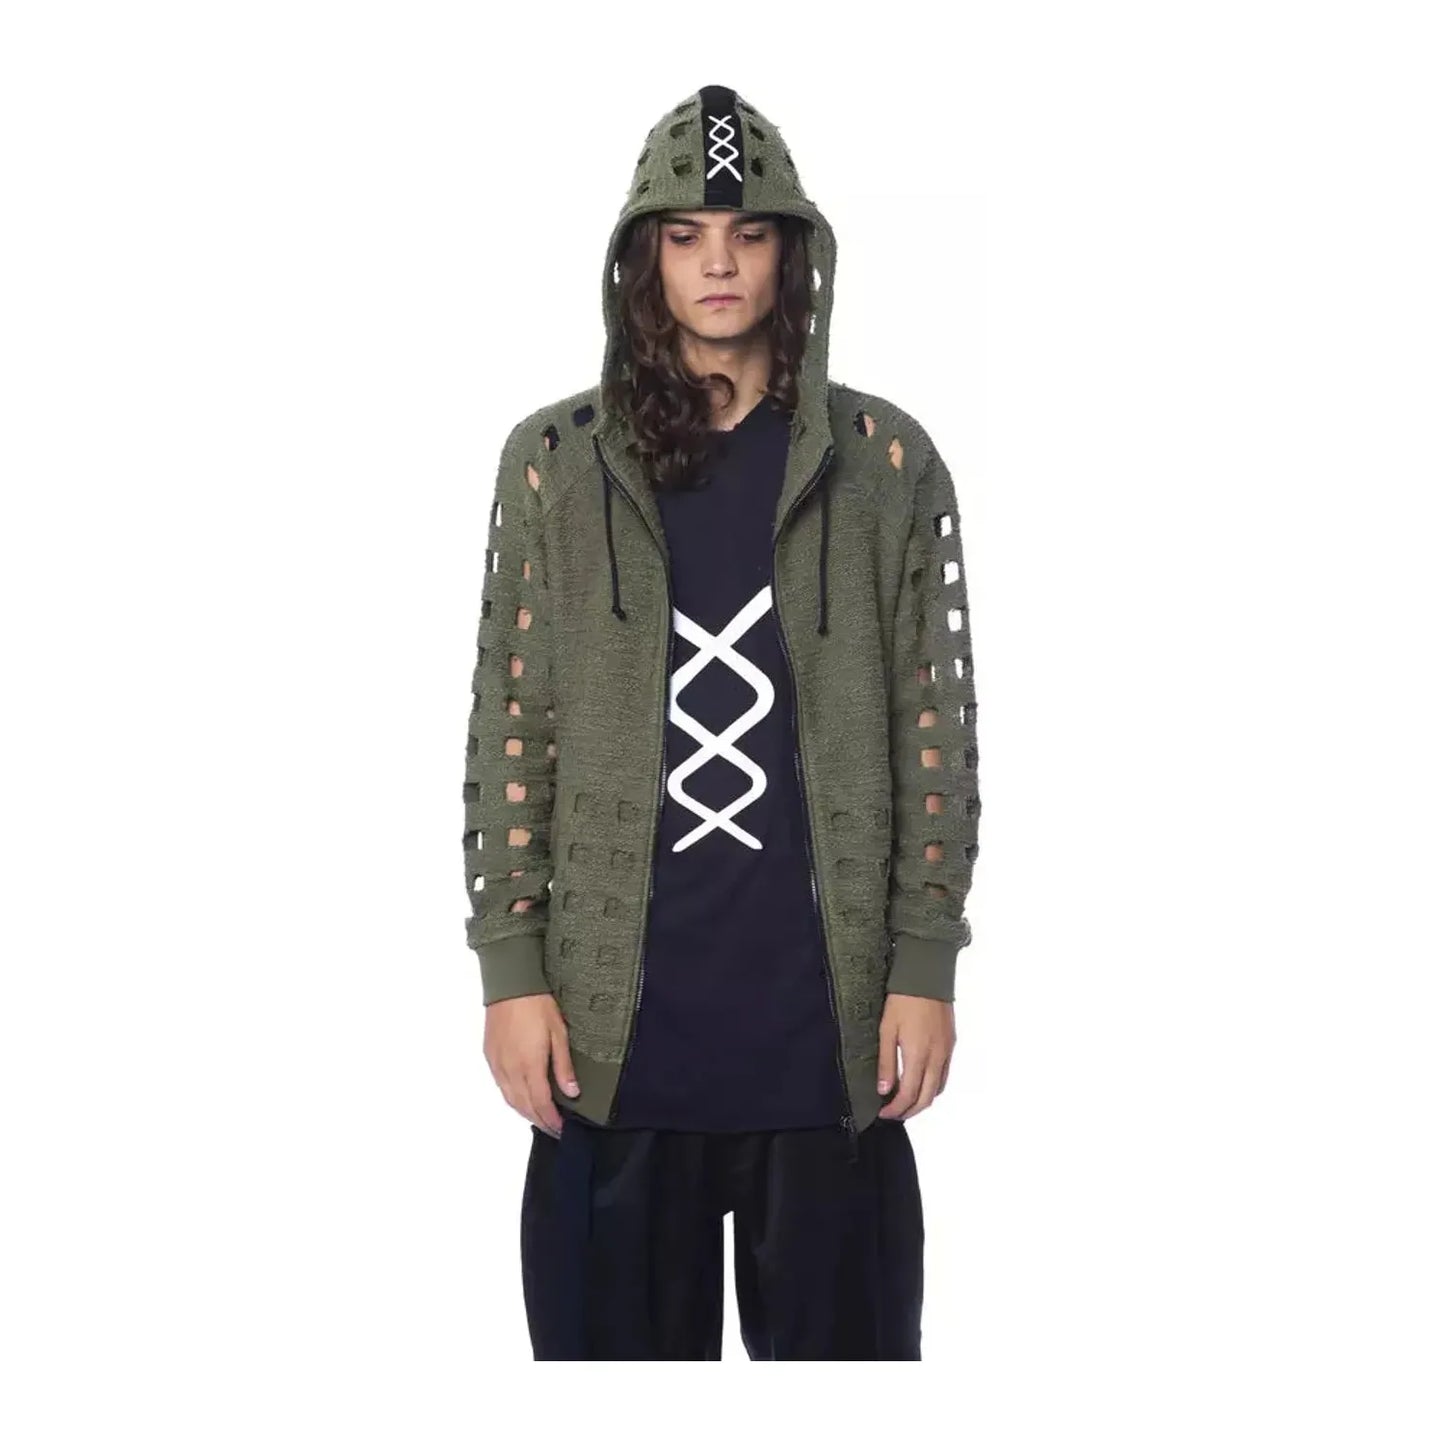 Nicolo Tonetto Oversized Hooded Fleece - Army Zip Comfort army-sweater-1 stock_product_image_12987_1406018399-13-96f7bb58-2d9.webp